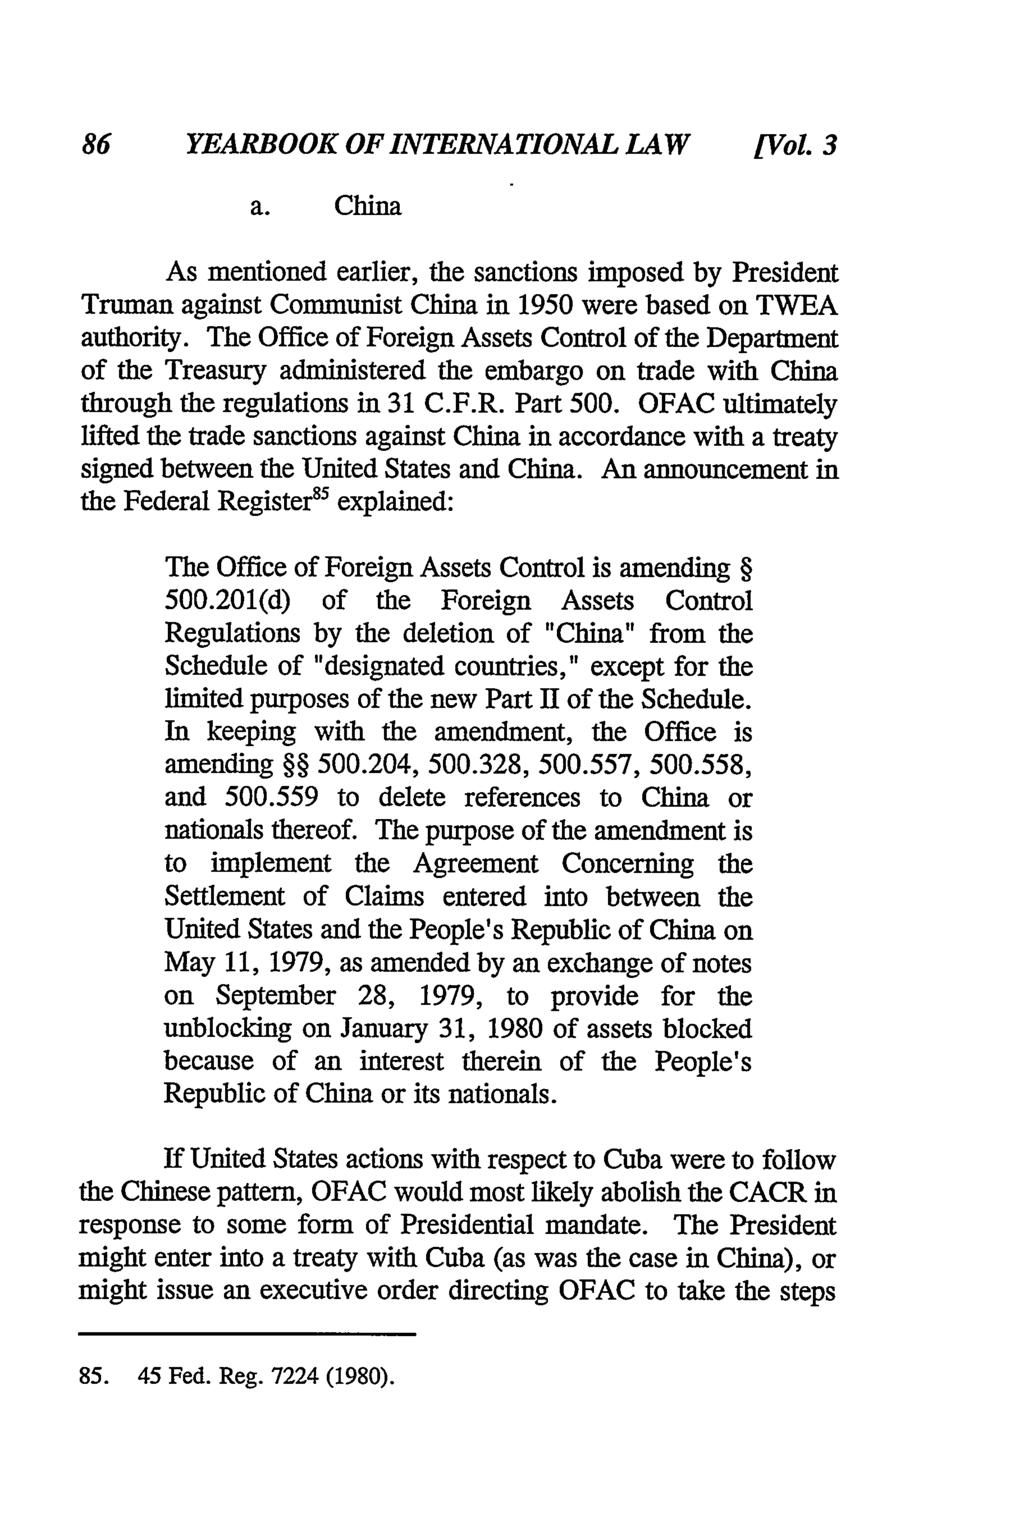 86 YEARBOOK OF INTERNATIONAL LAW [Vol 3 a. China As mentioned earlier, the sanctions imposed by President Truman against Communist China in 1950 were based on TWEA authority.